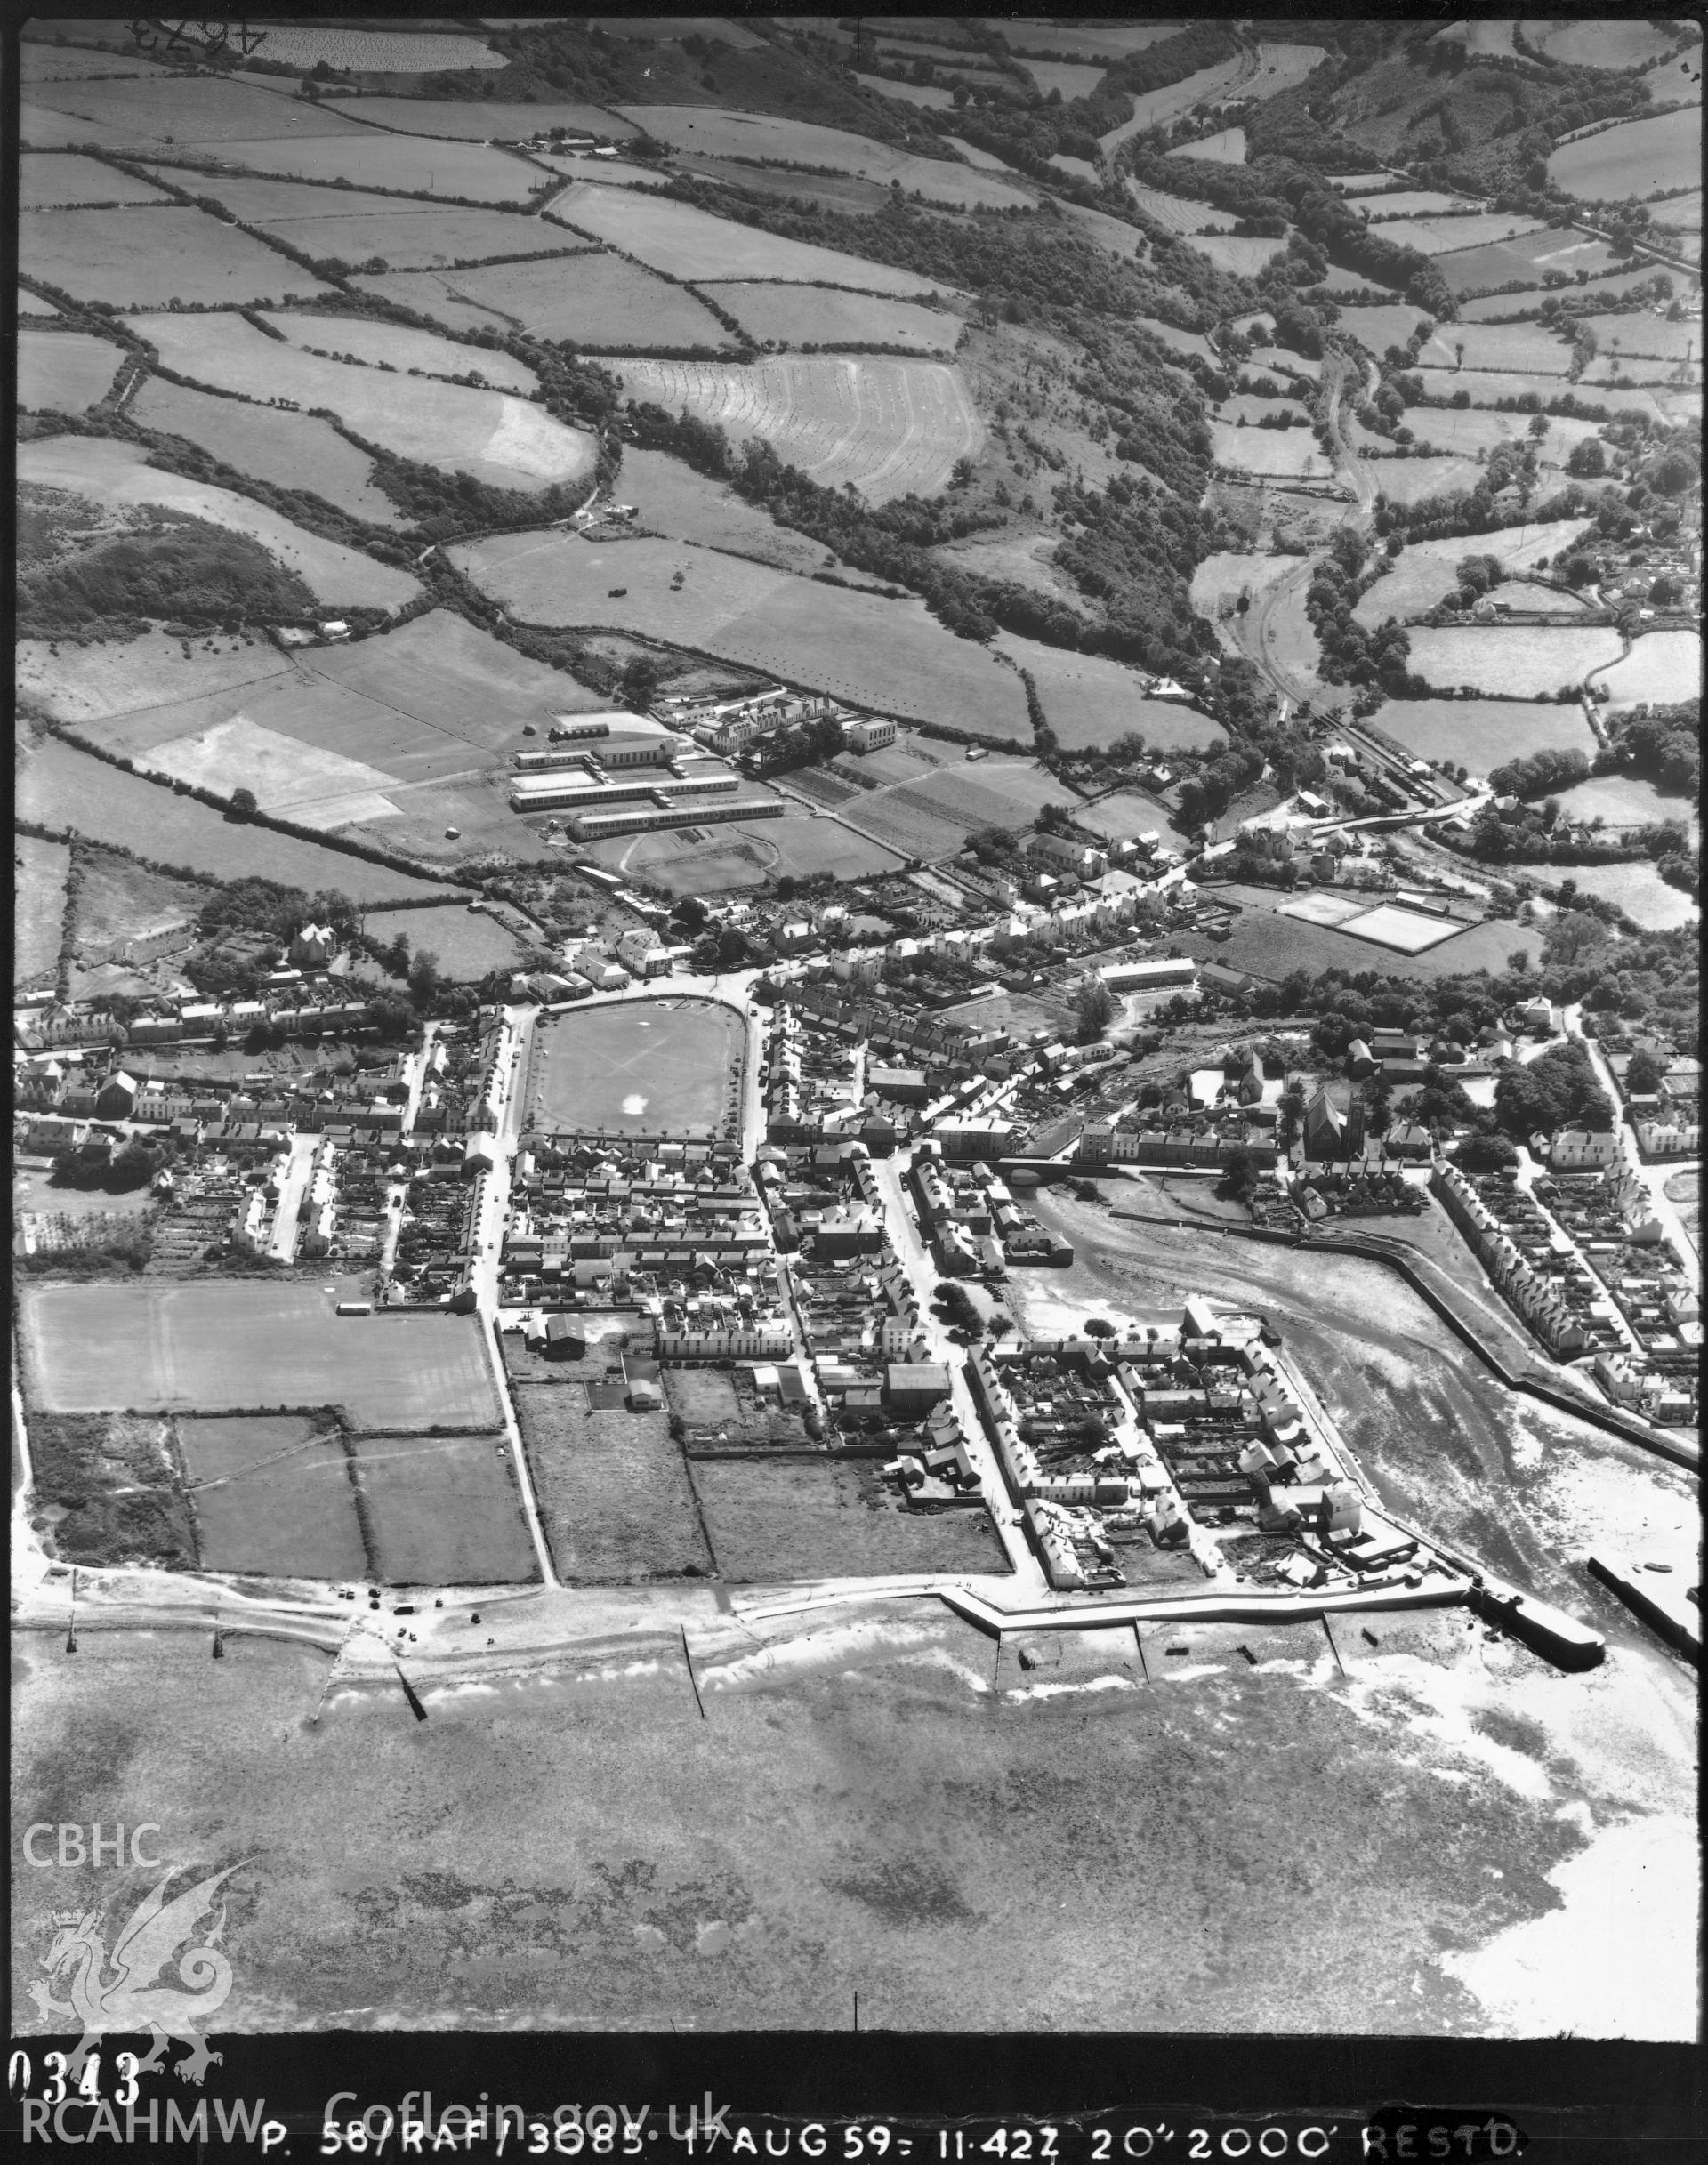 Black and white vertical aerial photograph taken by the RAF on 1959 centred on Aberaeron at a scale of 1:10000.